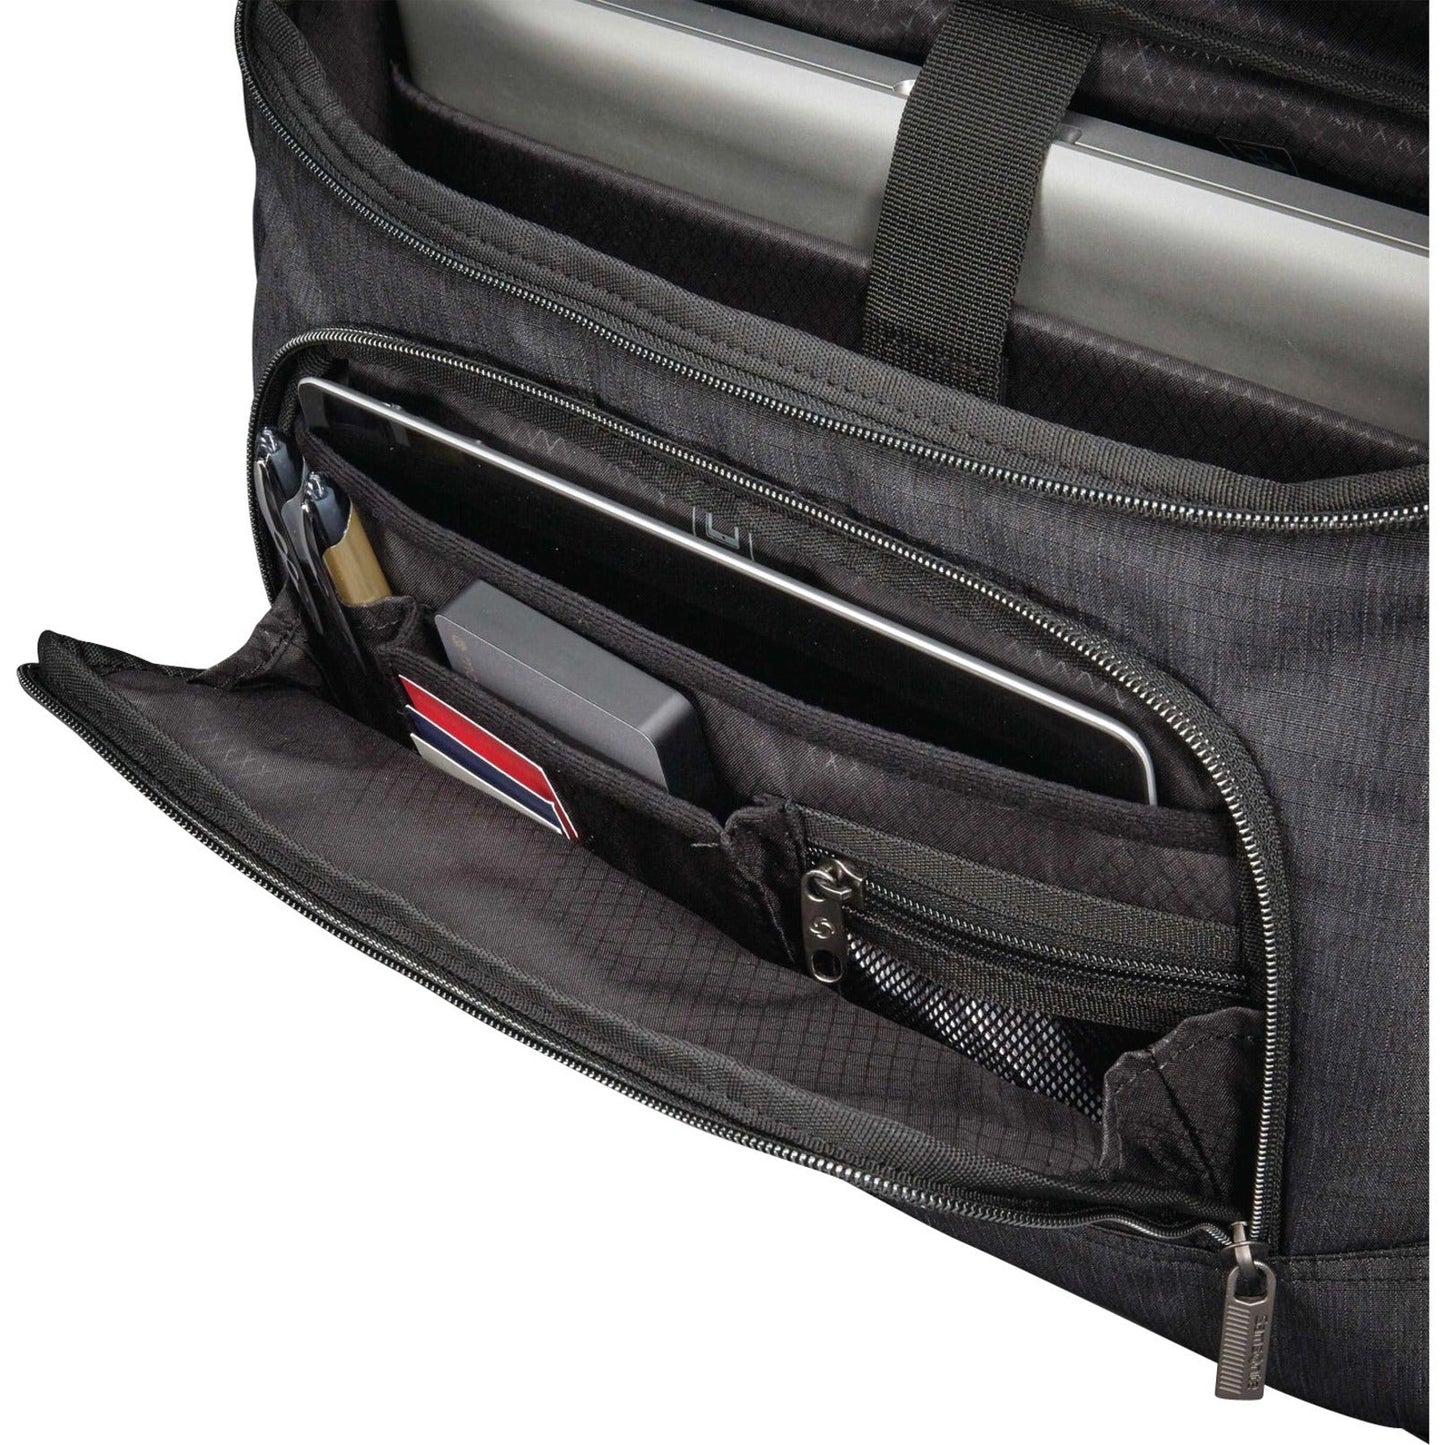 Samsonite Modern Utility Carrying Case (Messenger) for 15.6" Apple iPad Notebook Tablet - Charcoal Heather Charcoal